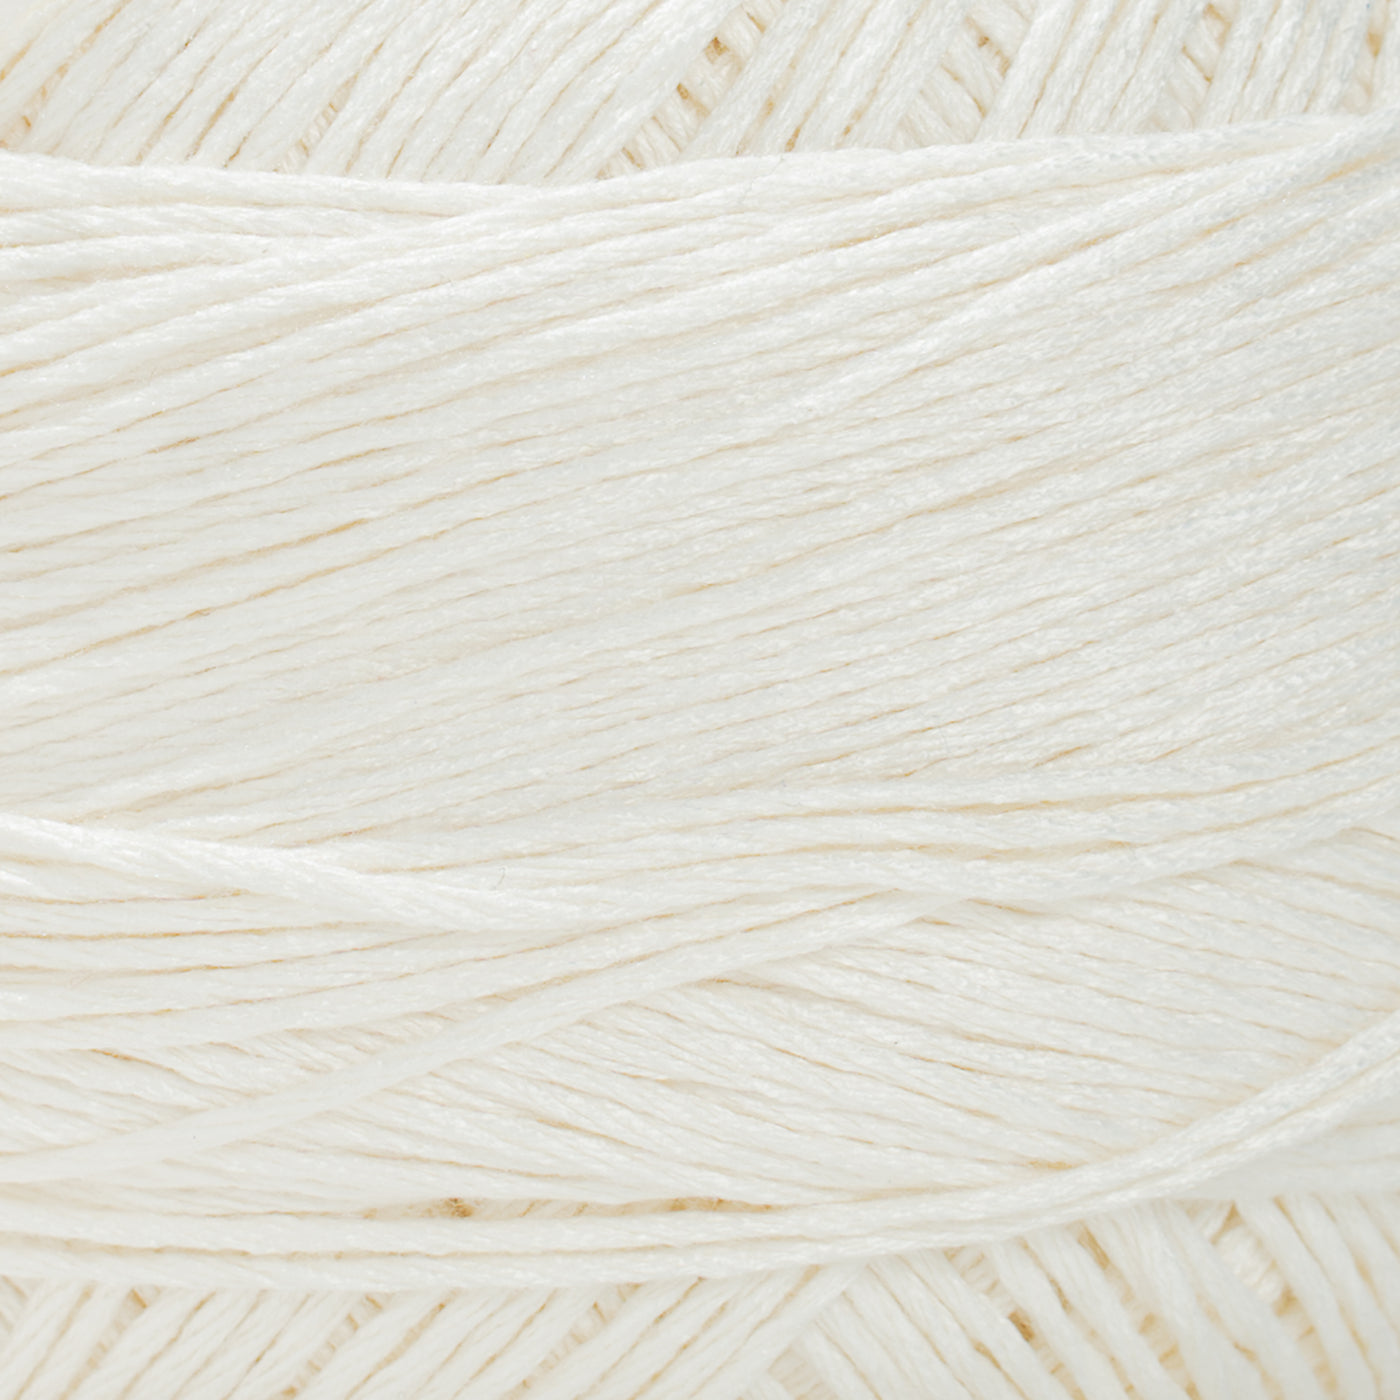 BAMBOO DELUXE YARN - WHITE COLOR